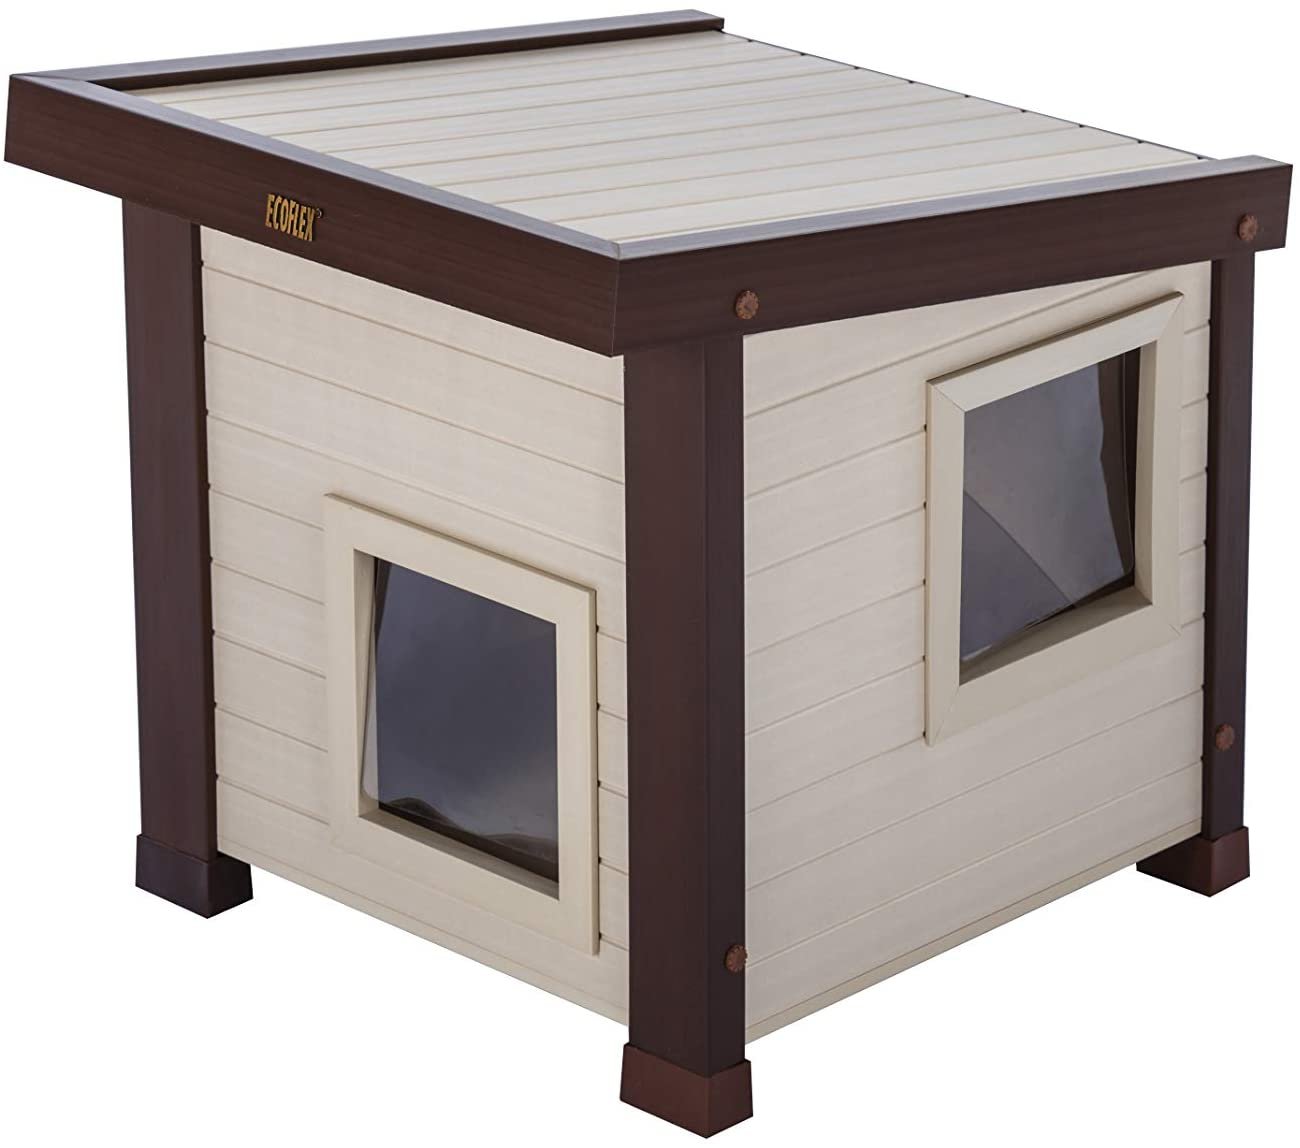 New Age Pet ecoFlex Albany Outdoor Feral Cat House